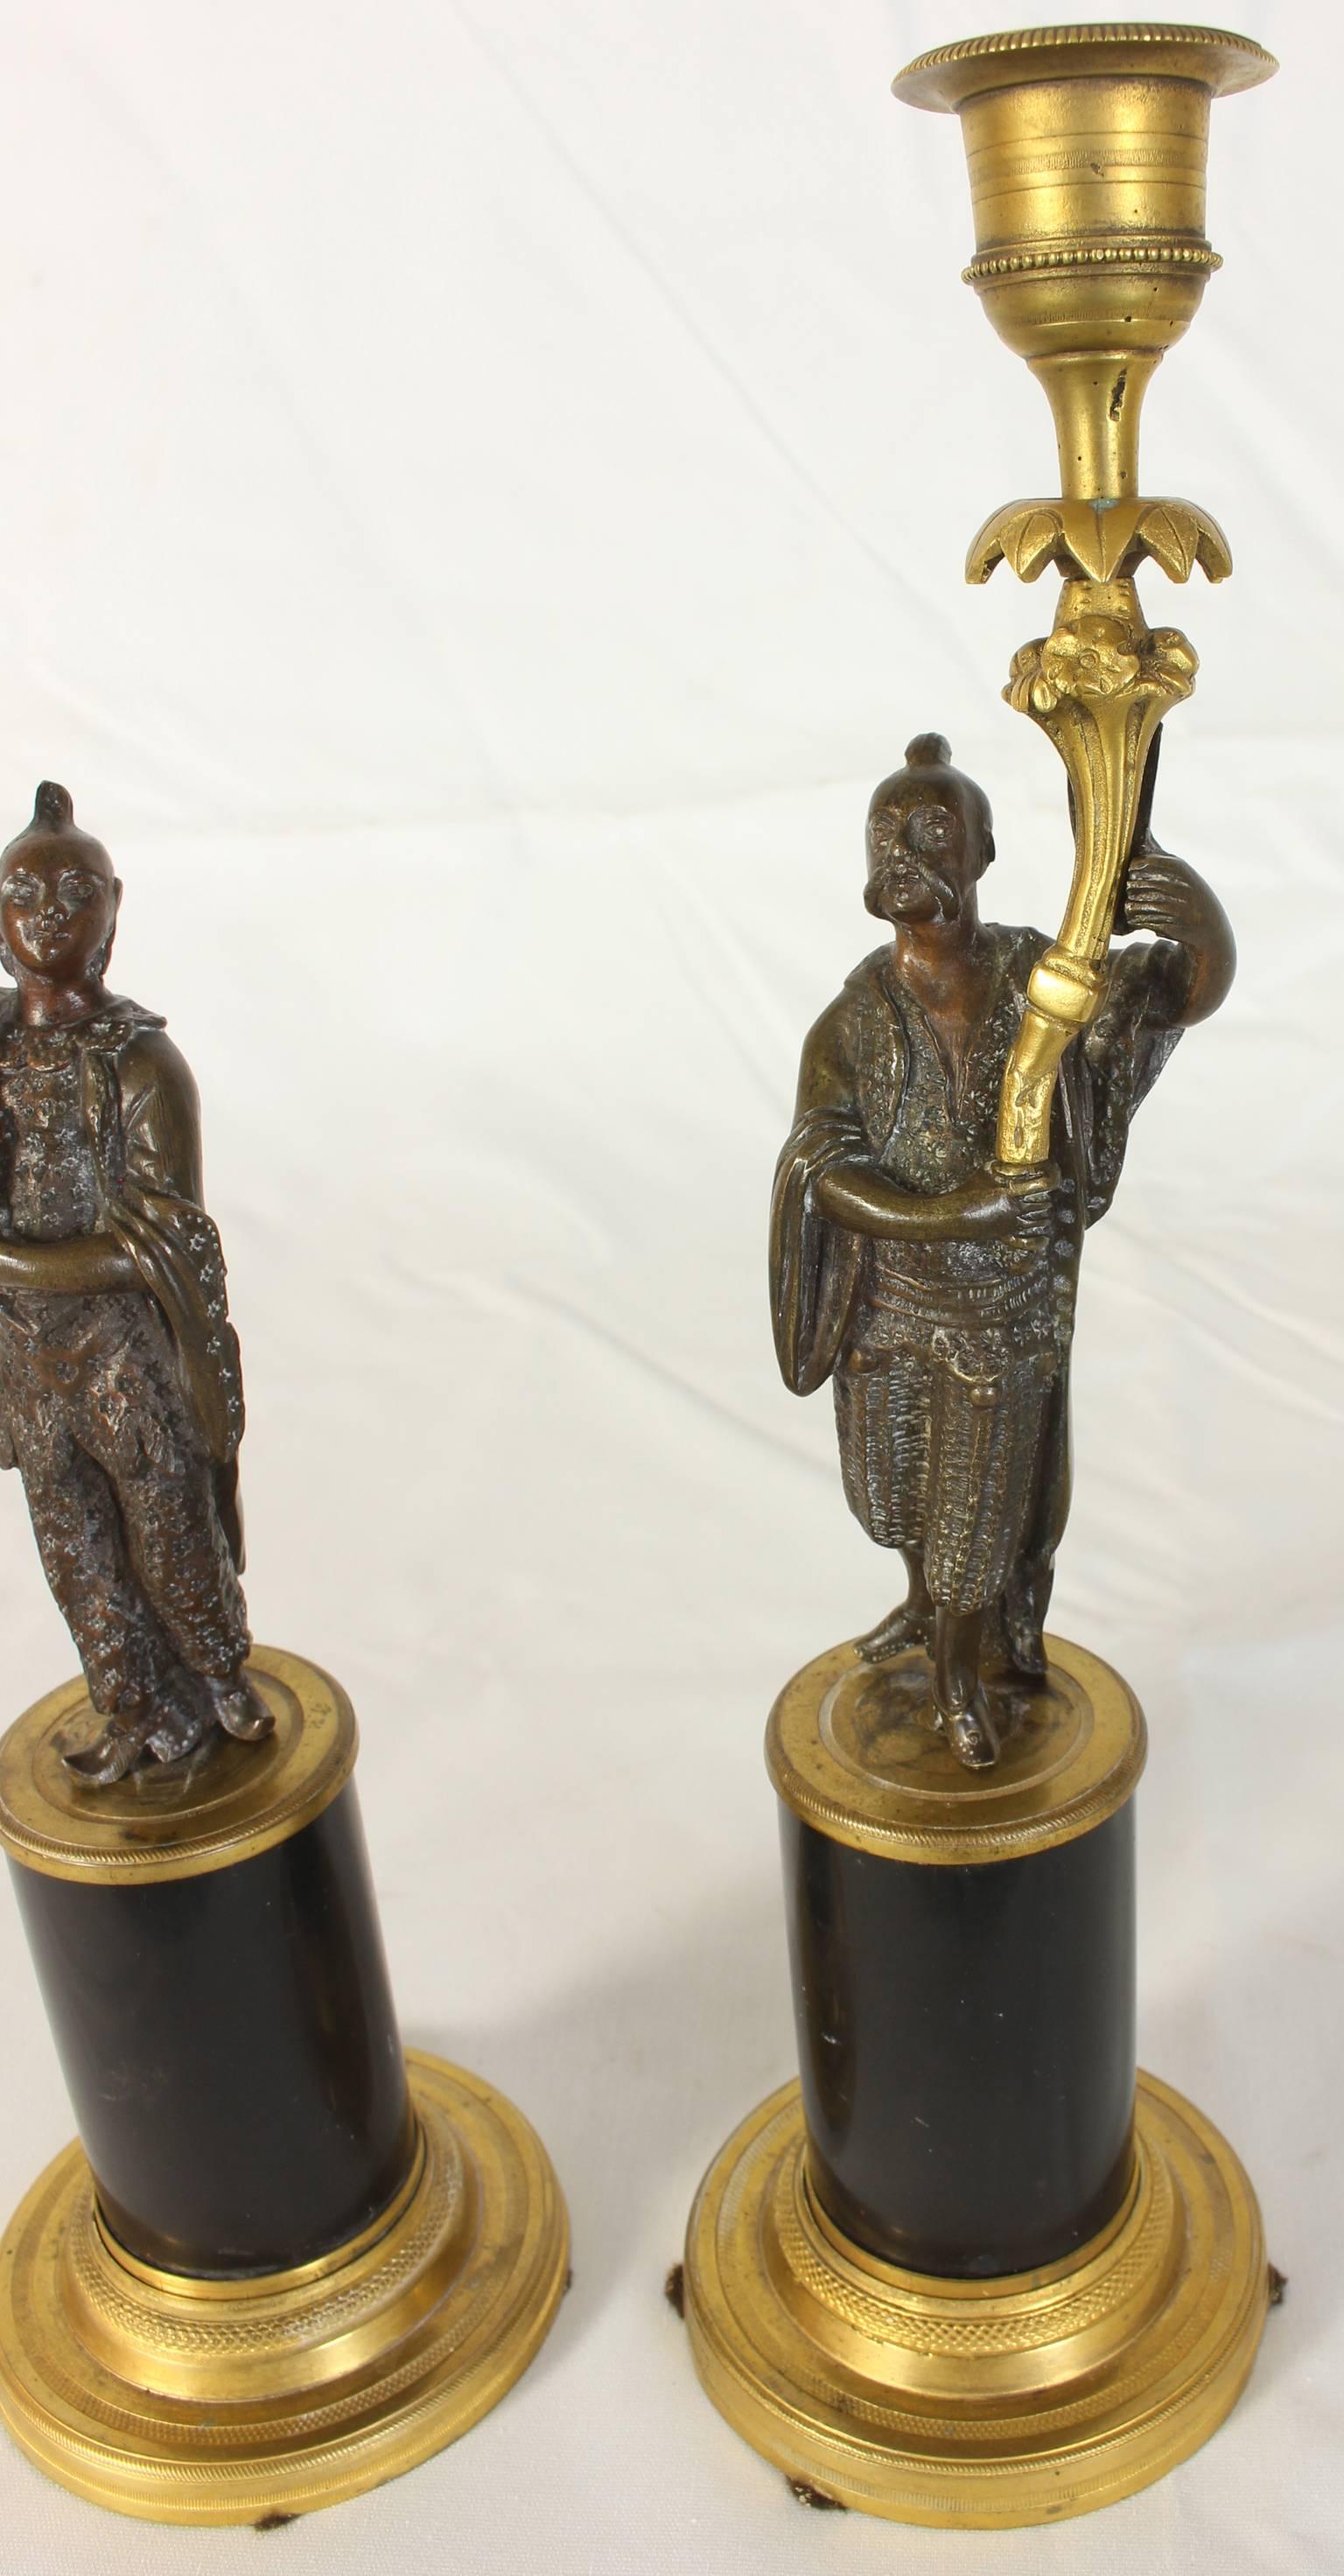 Pair of Early 19th Century Chinoiserie Figural Candlesticks For Sale 2